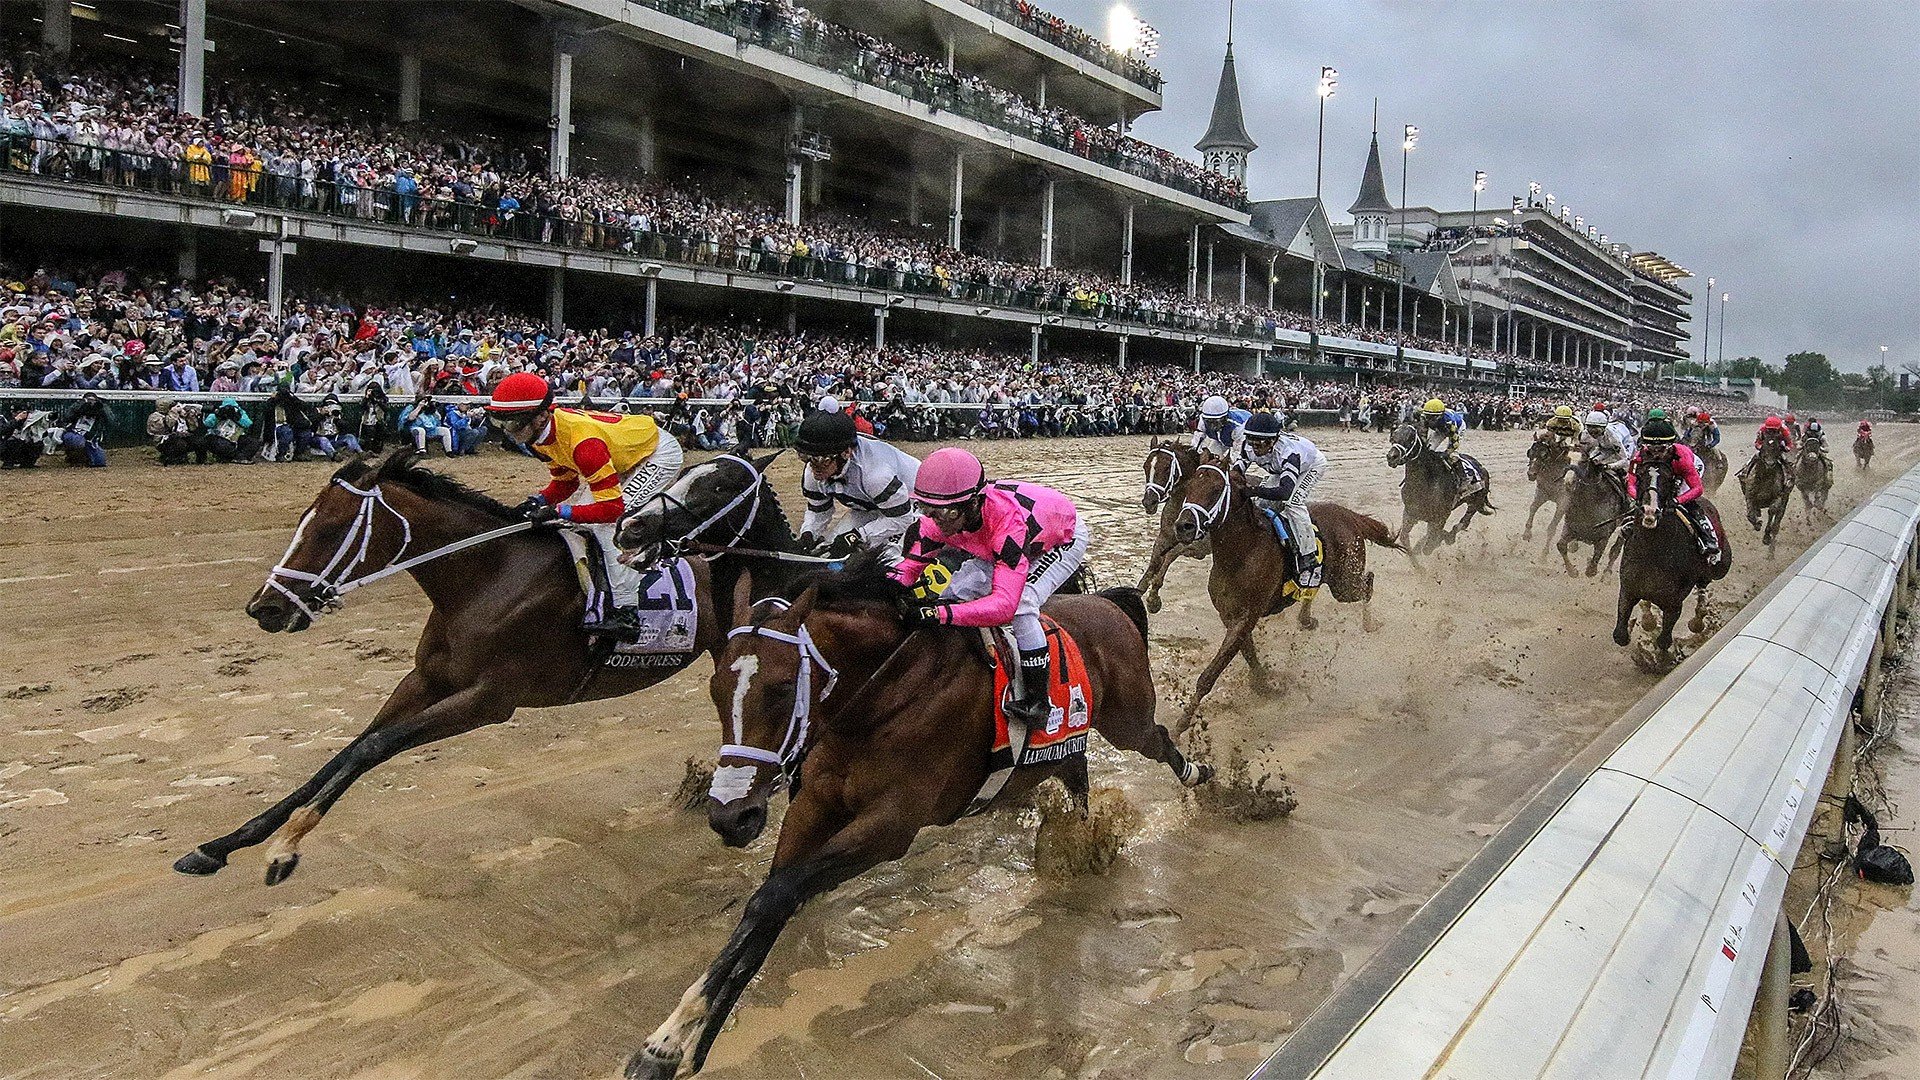 DraftKings goes live with first-ever racing product DK Horse ahead of Kentucky Derby